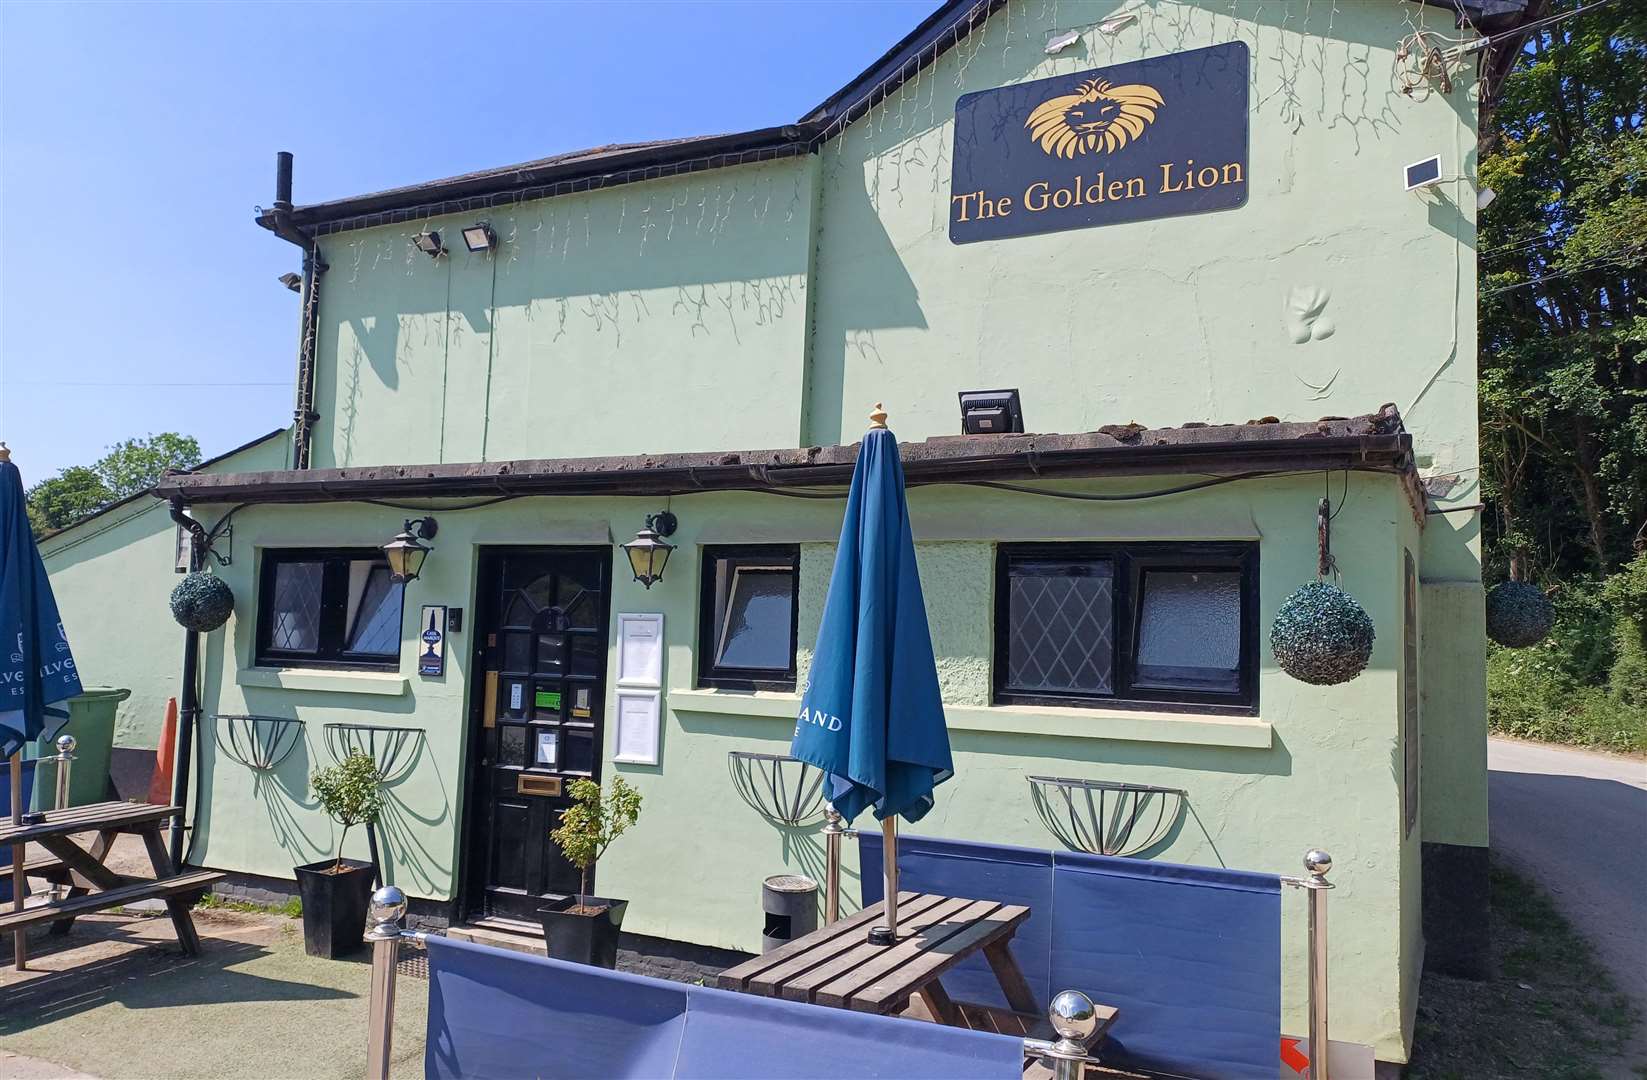 The vineyard has taken on the lease of the Golden Lion in Luddesdown